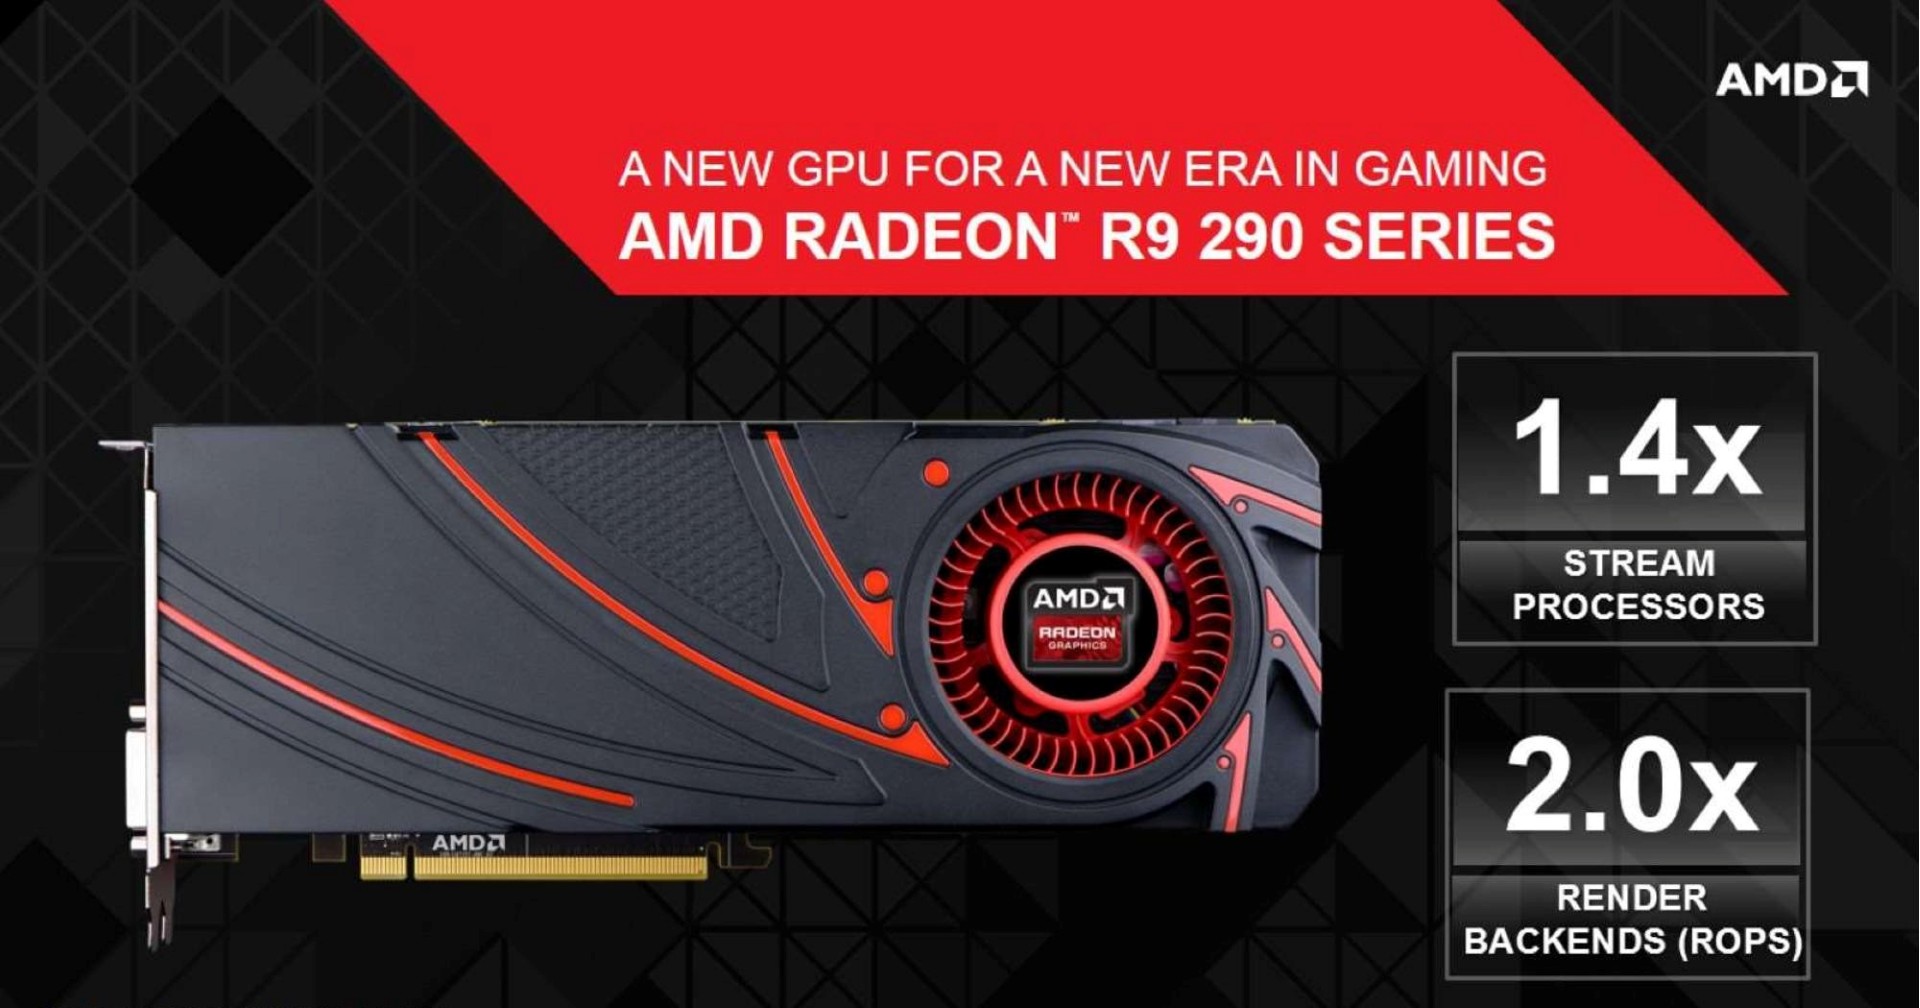 AMD Radeon R9 290X confirmed to feature 